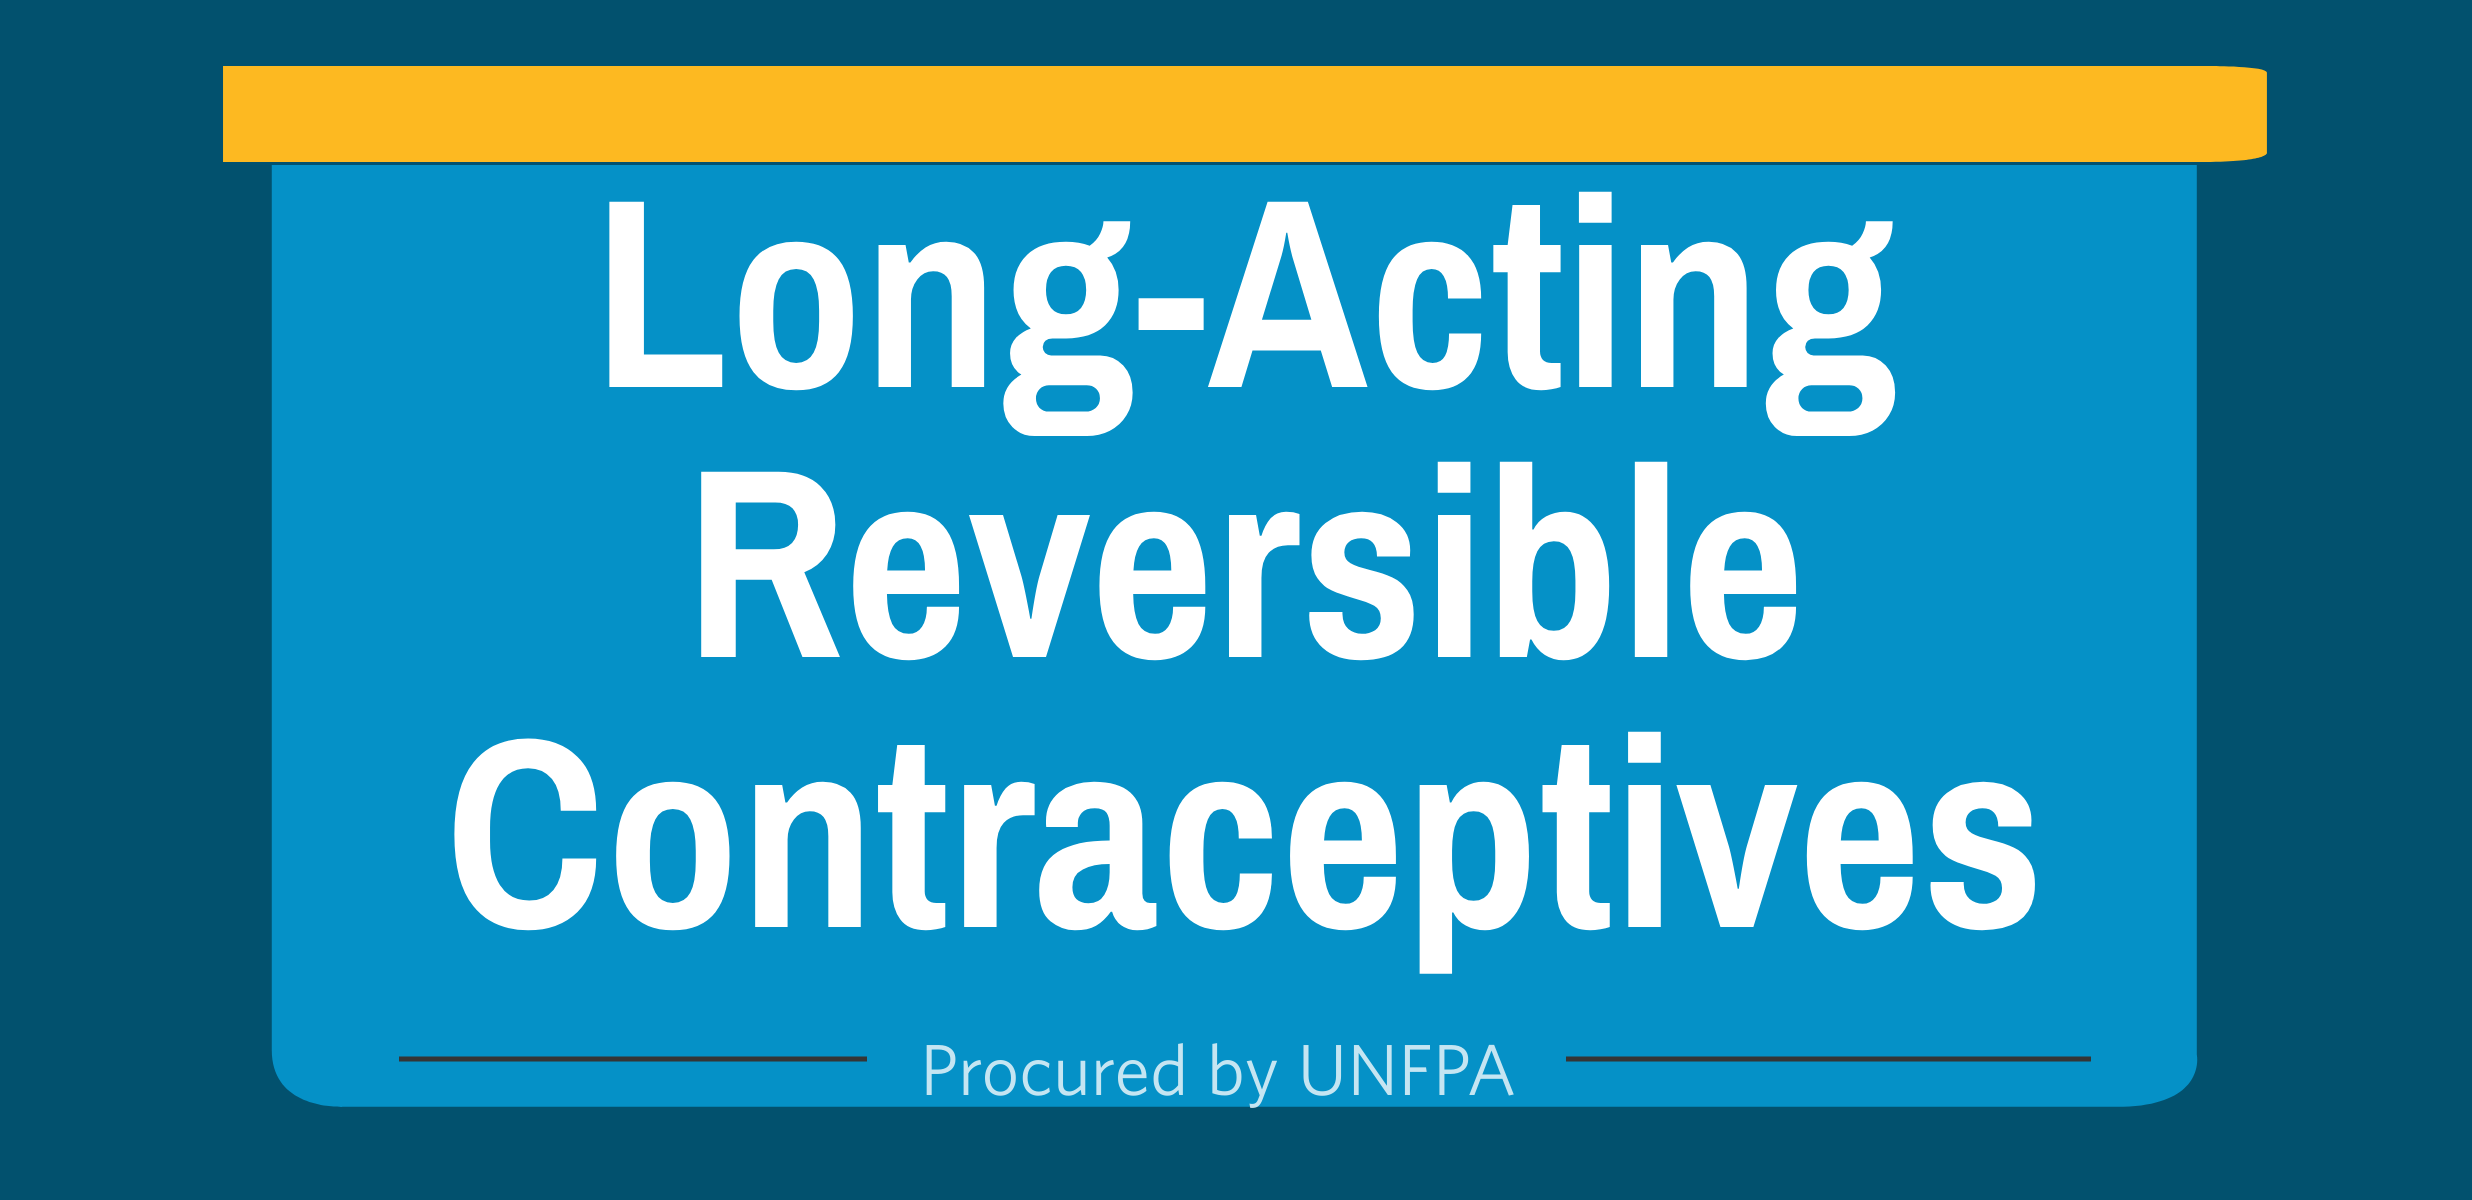 Long-Acting Reversible Contraceptives